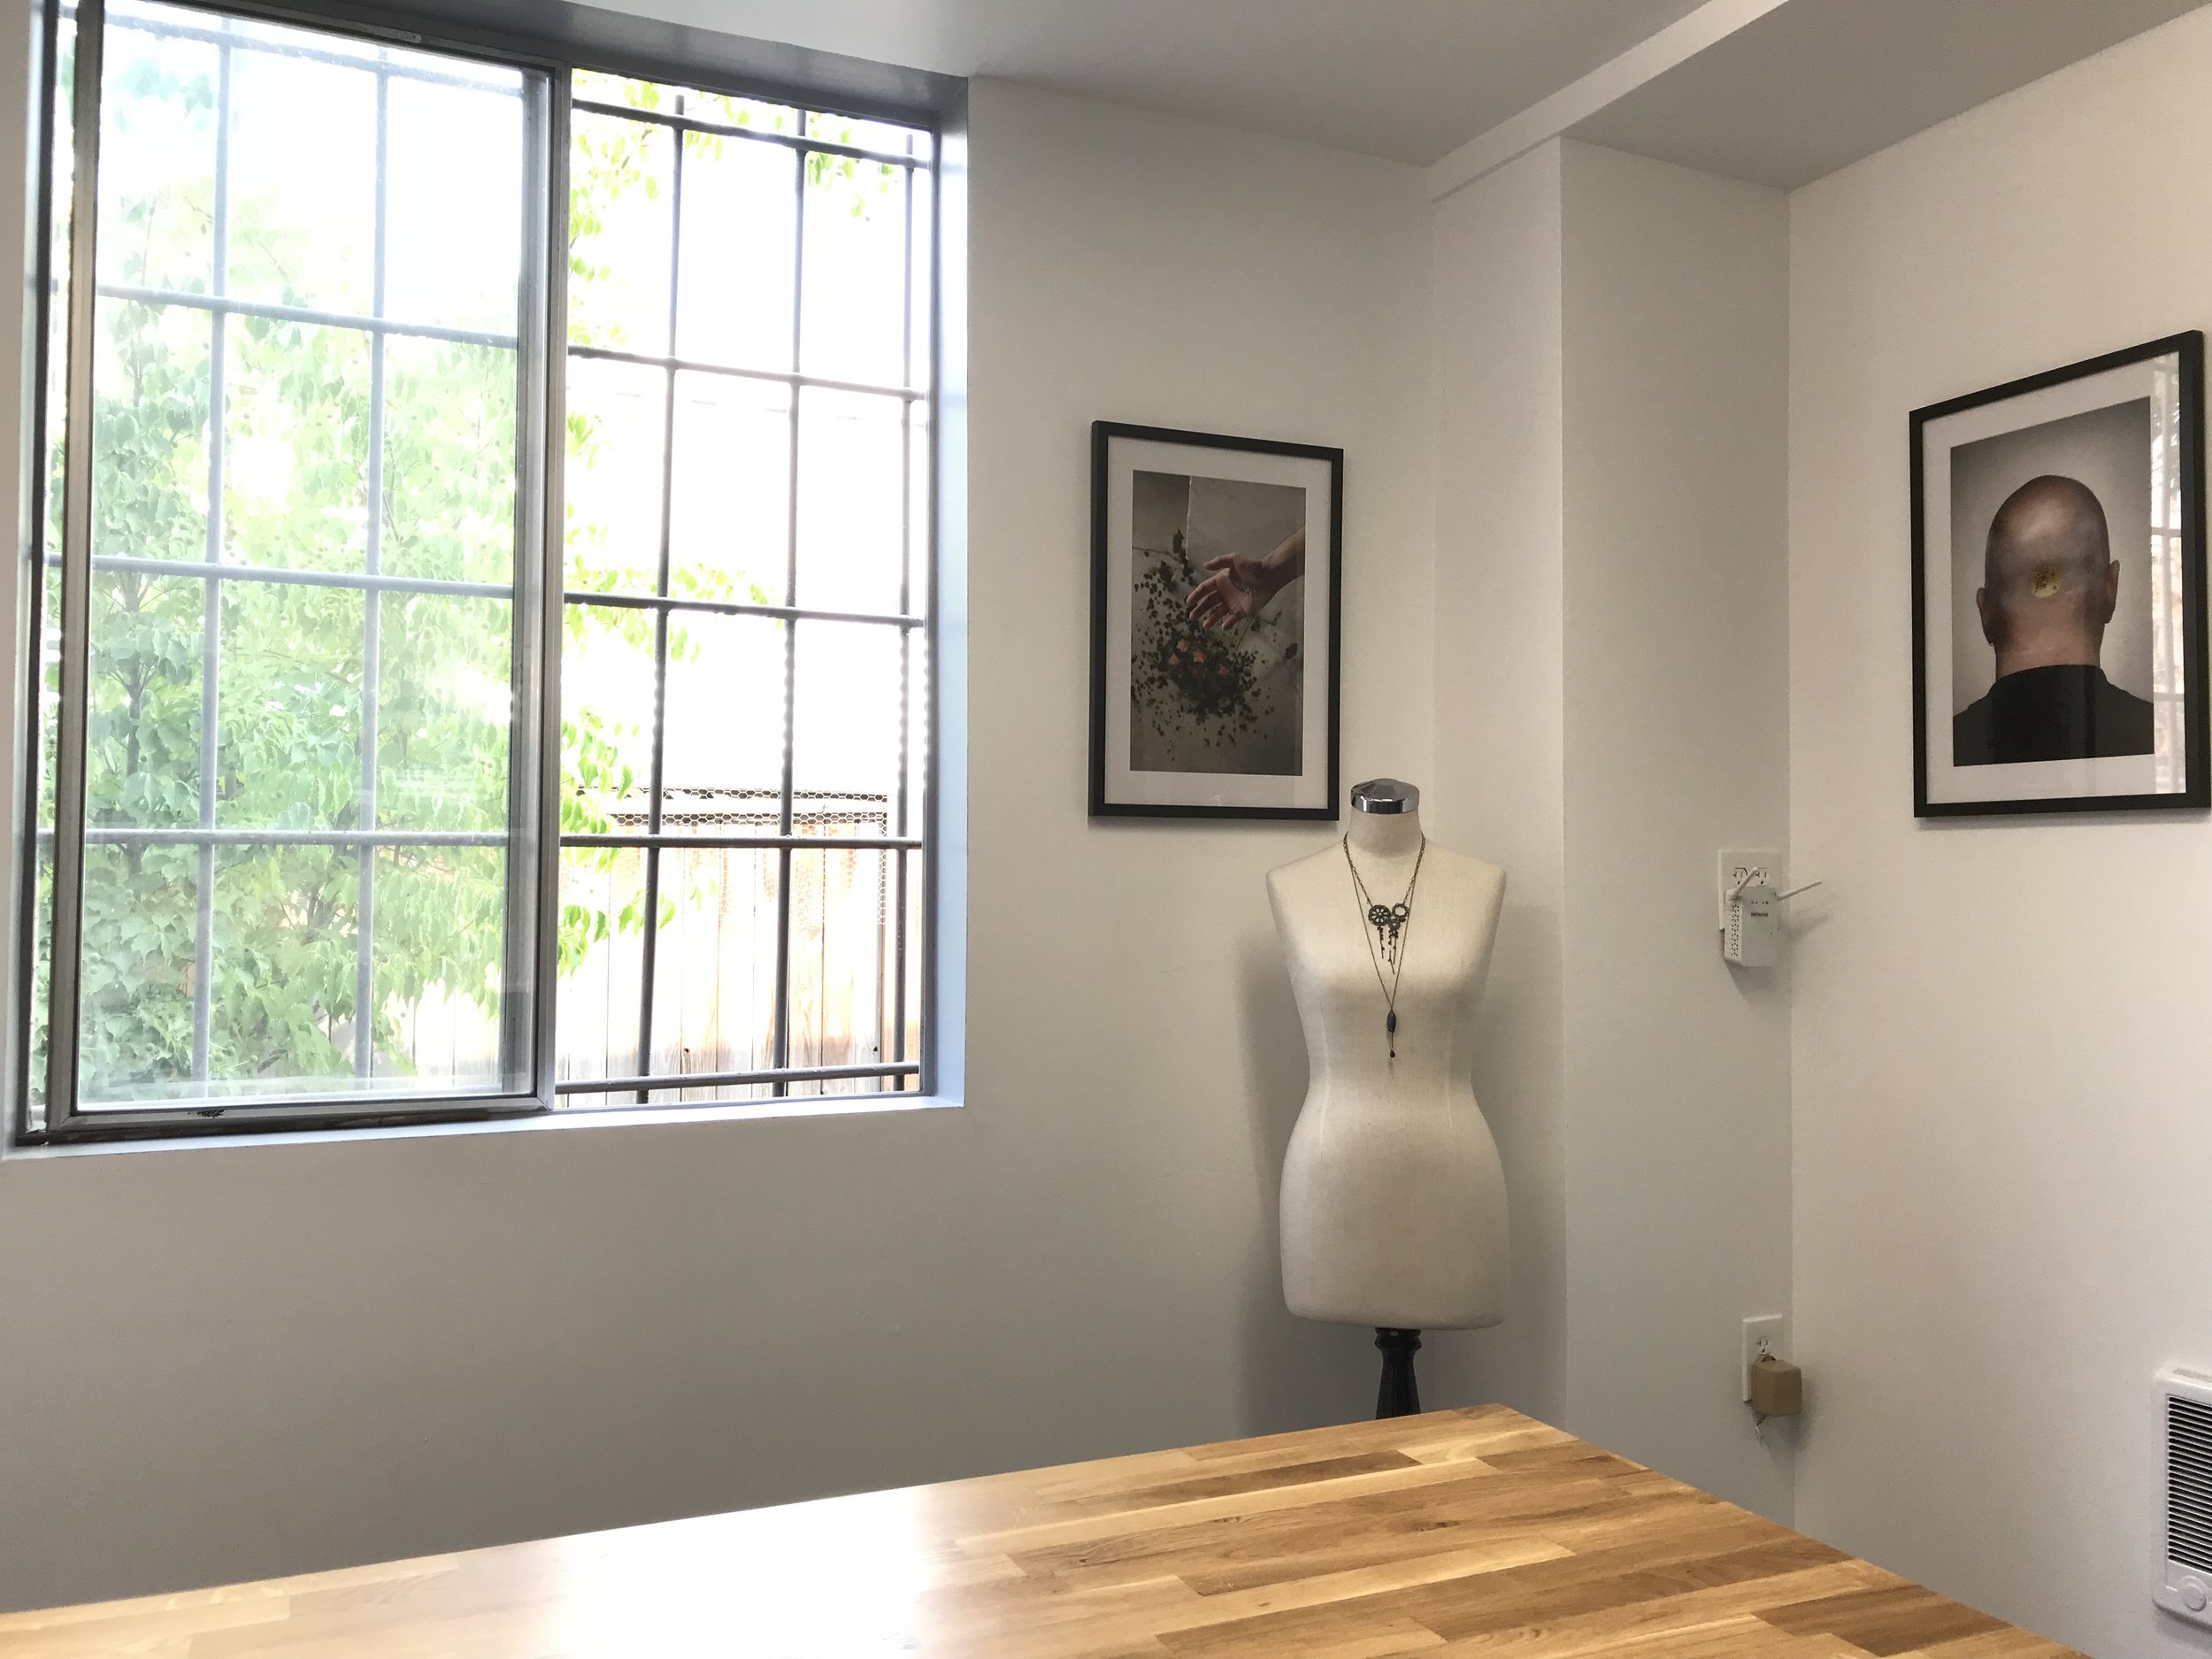 The view from my desk! Not only do I have a great breeze in the summer with 2 open windows, but there's a real grown up heater on that right wall! Plus it's fun to dress up the mannequin with jewels and have a home for some prints from my Lick series.